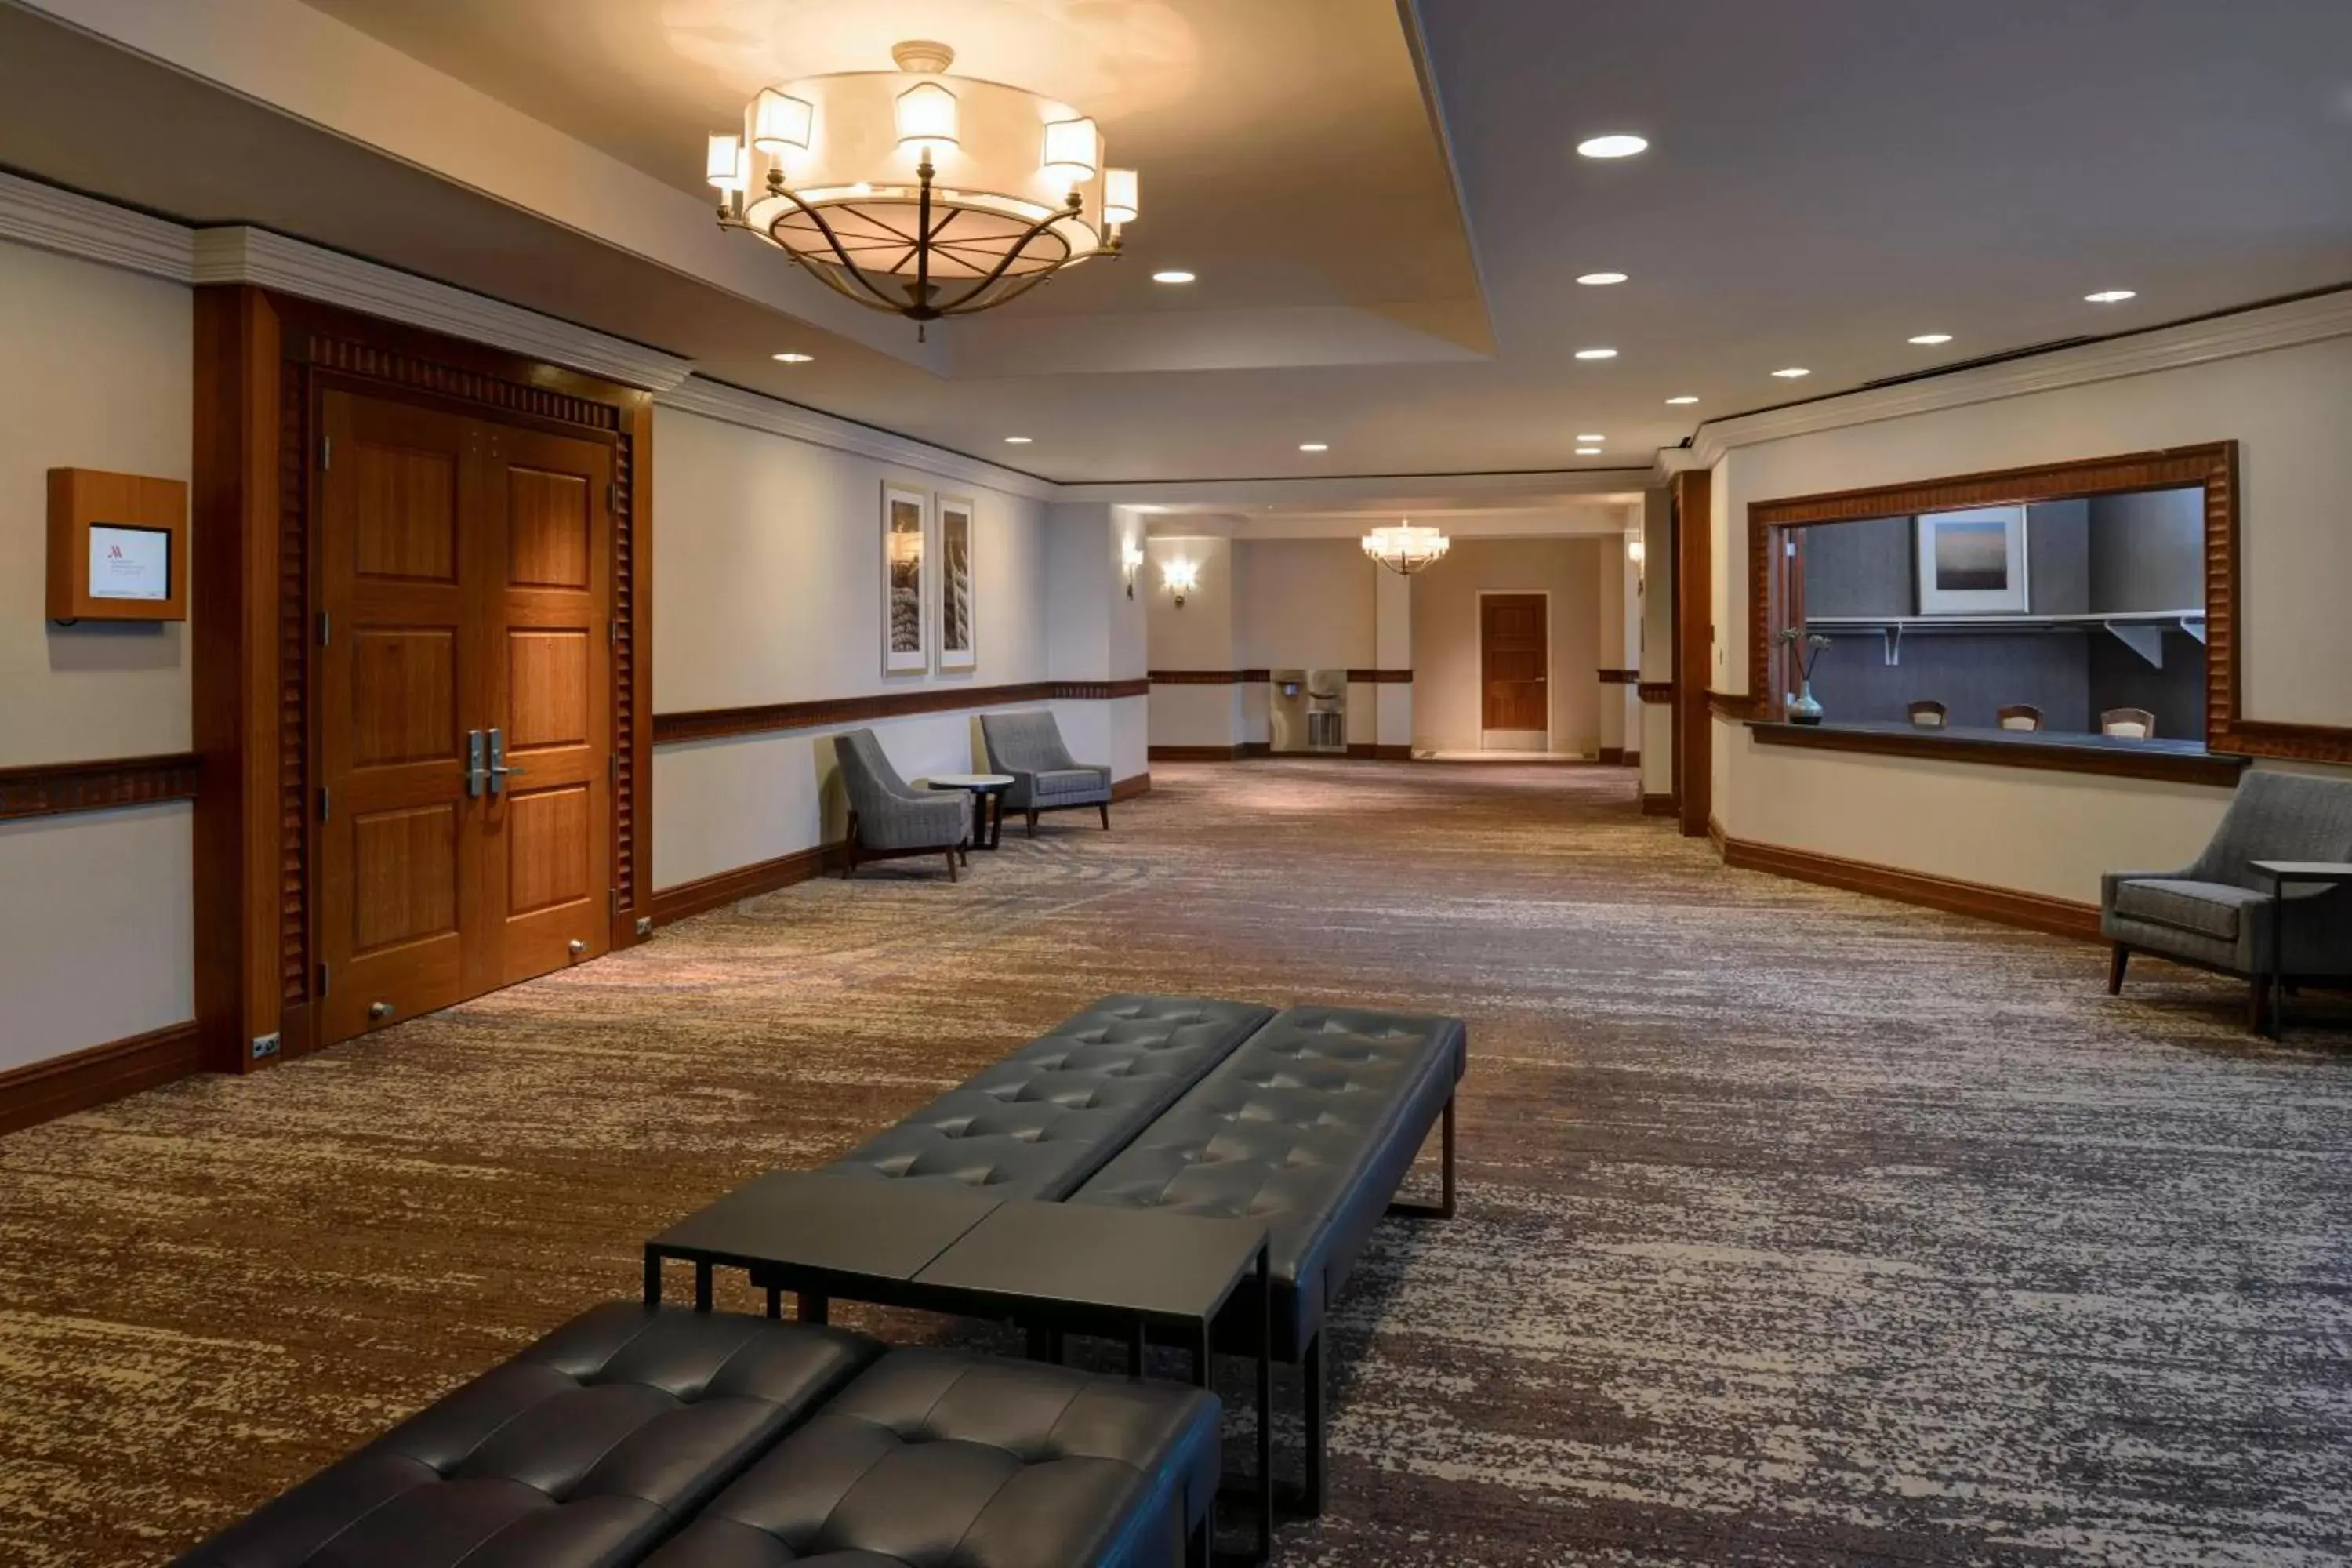 Meeting/conference room in Newport News Marriott at City Center